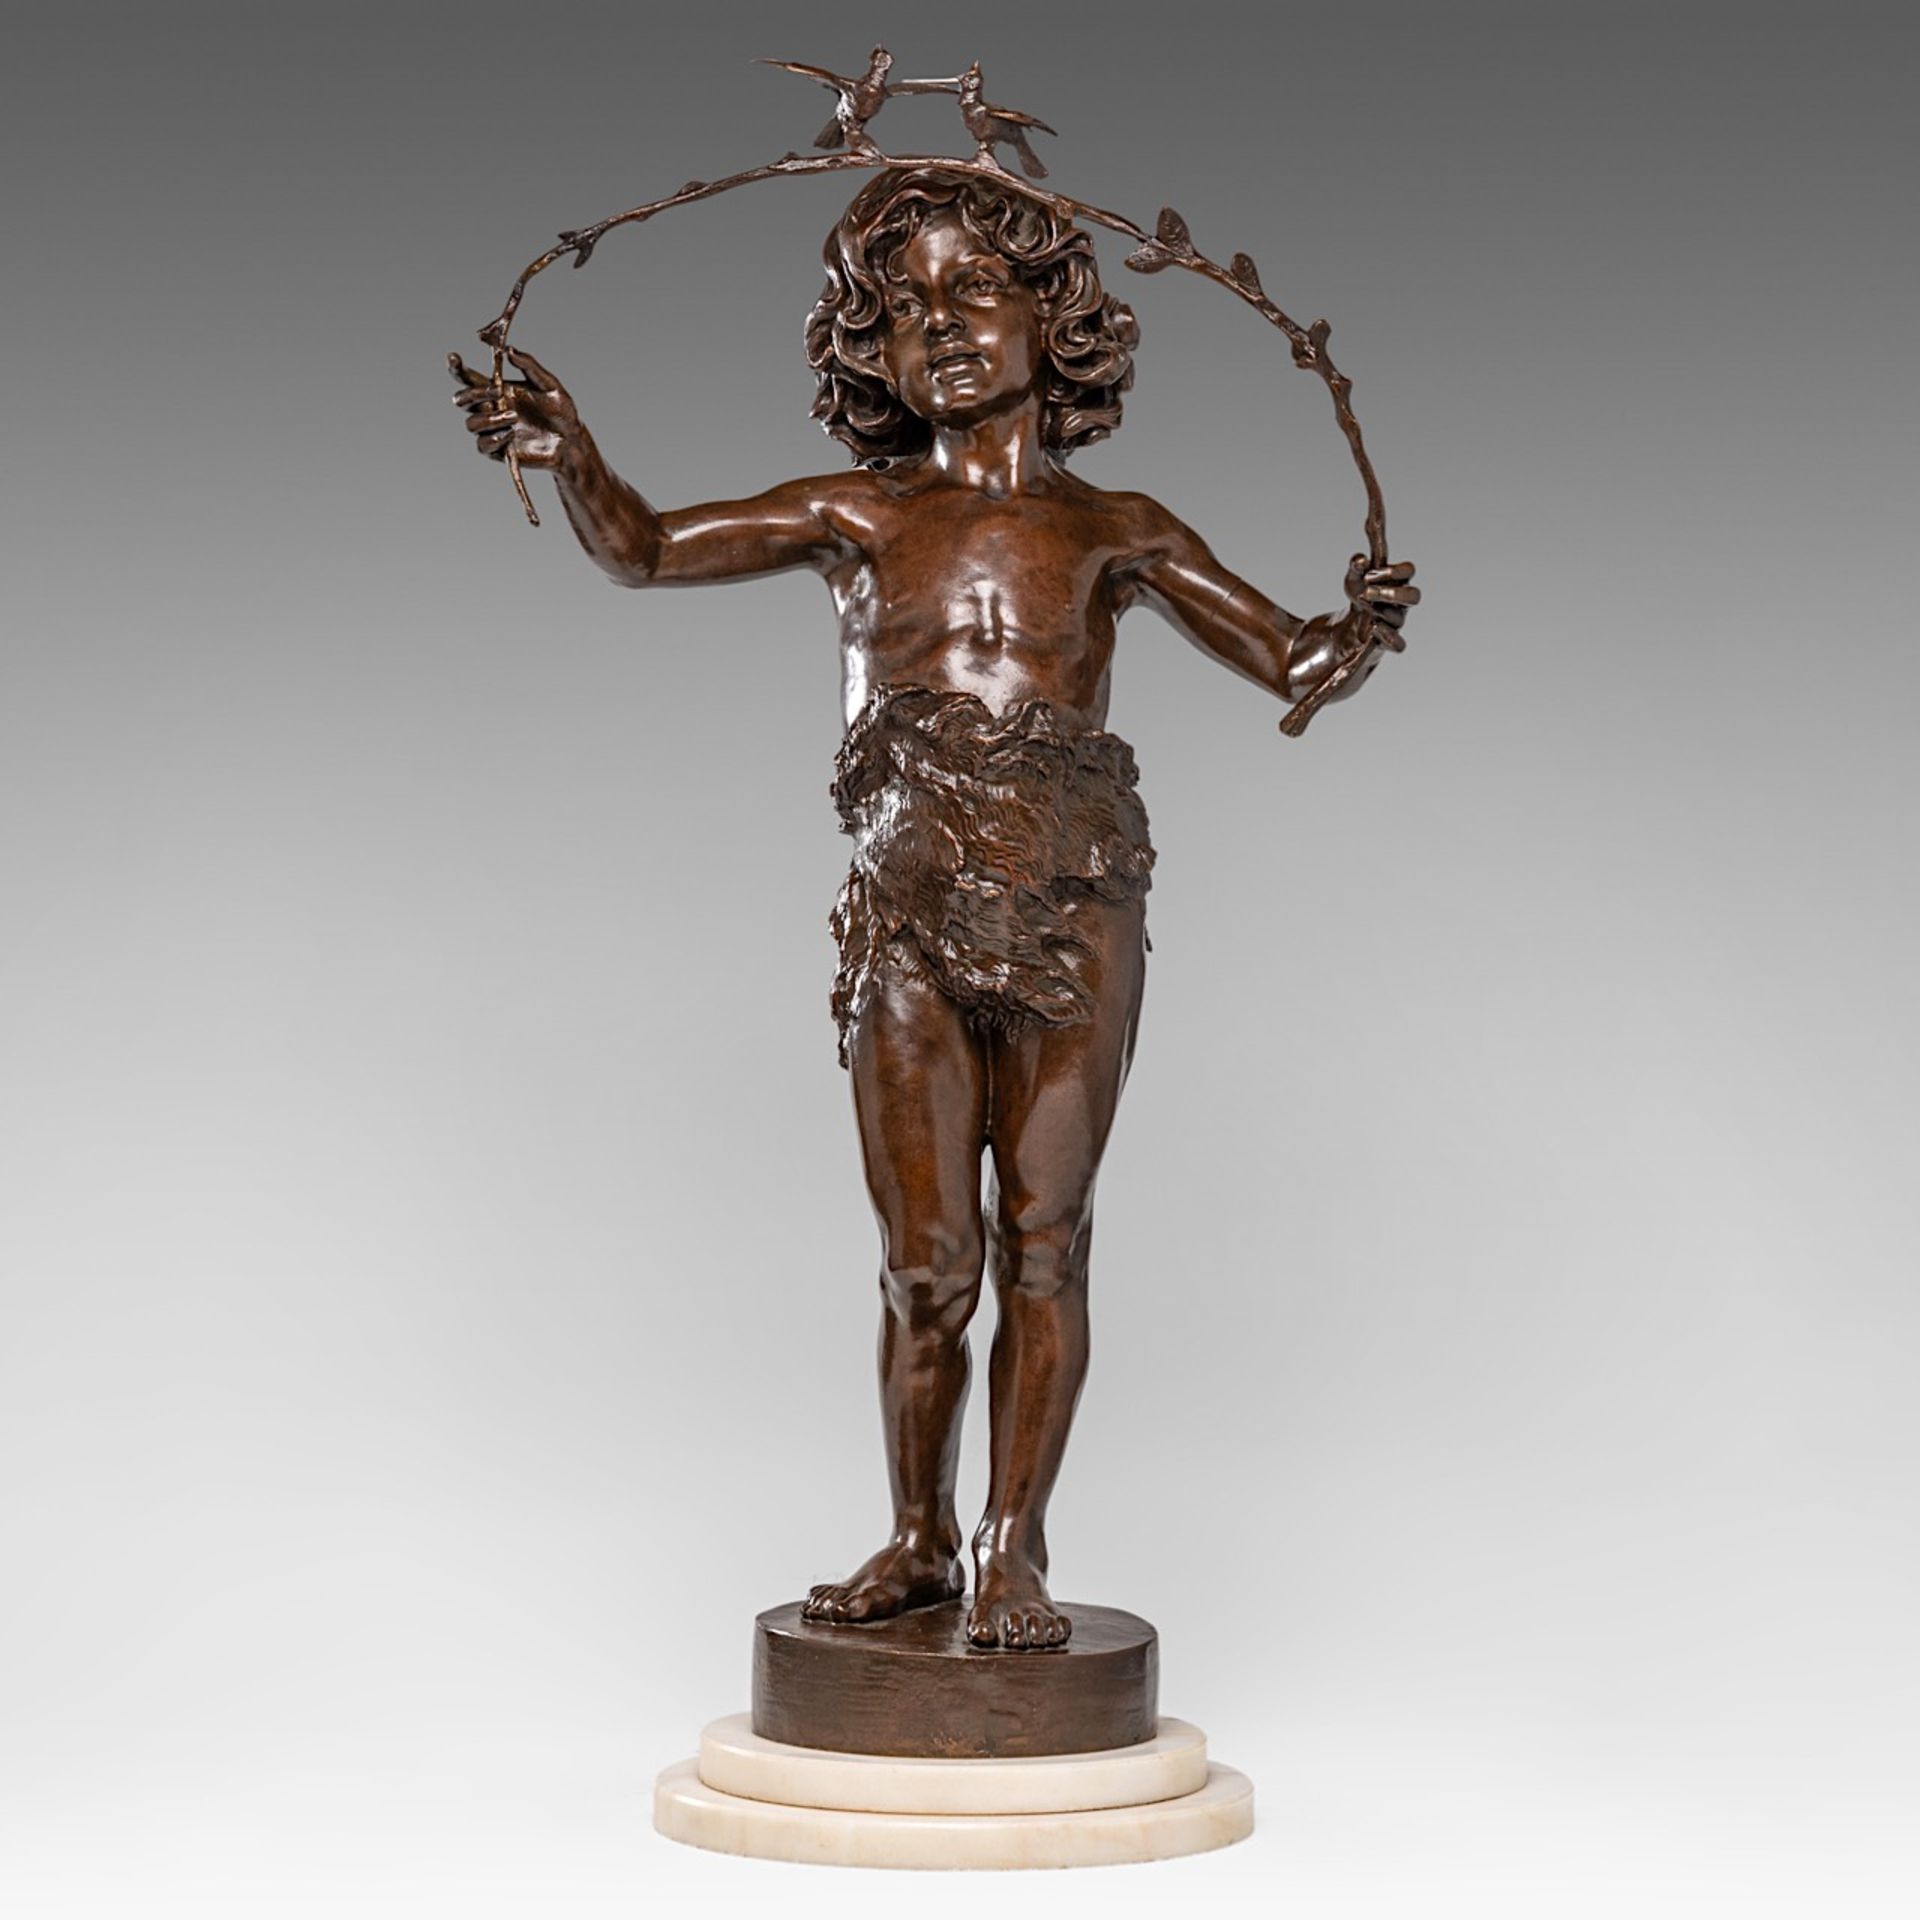 Marcel Debut (1865-1933), boy playing with birds, patinated bronze, H 70 cm - Image 2 of 6